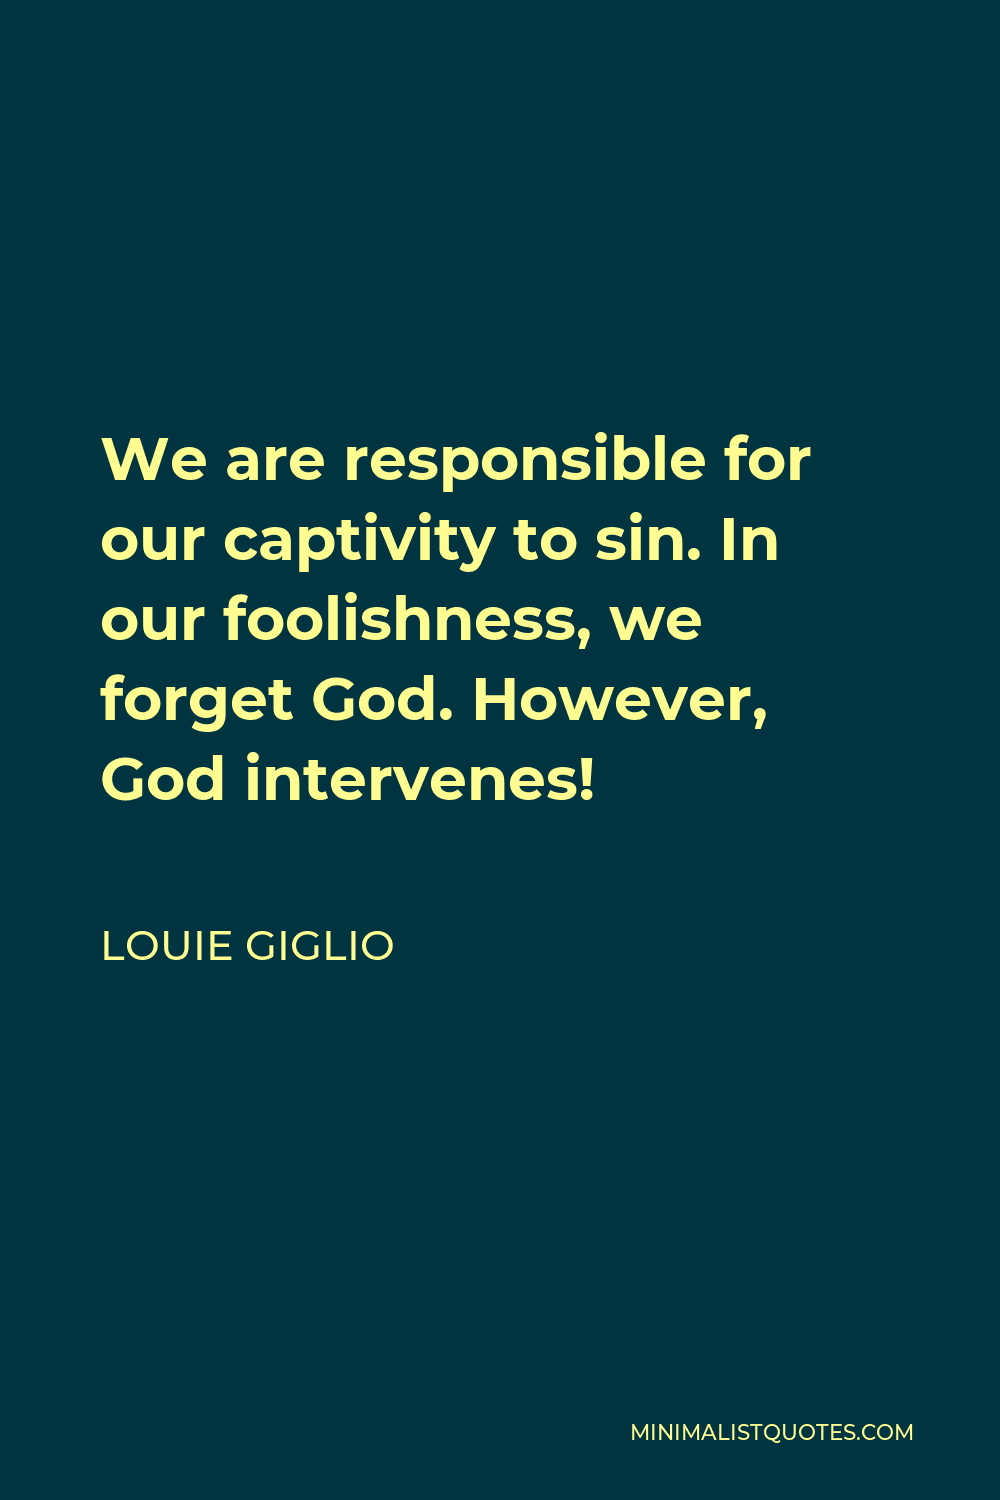 Louie Giglio Quote - We are responsible for our captivity to sin. In our foolishness, we forget God. However, God intervenes!